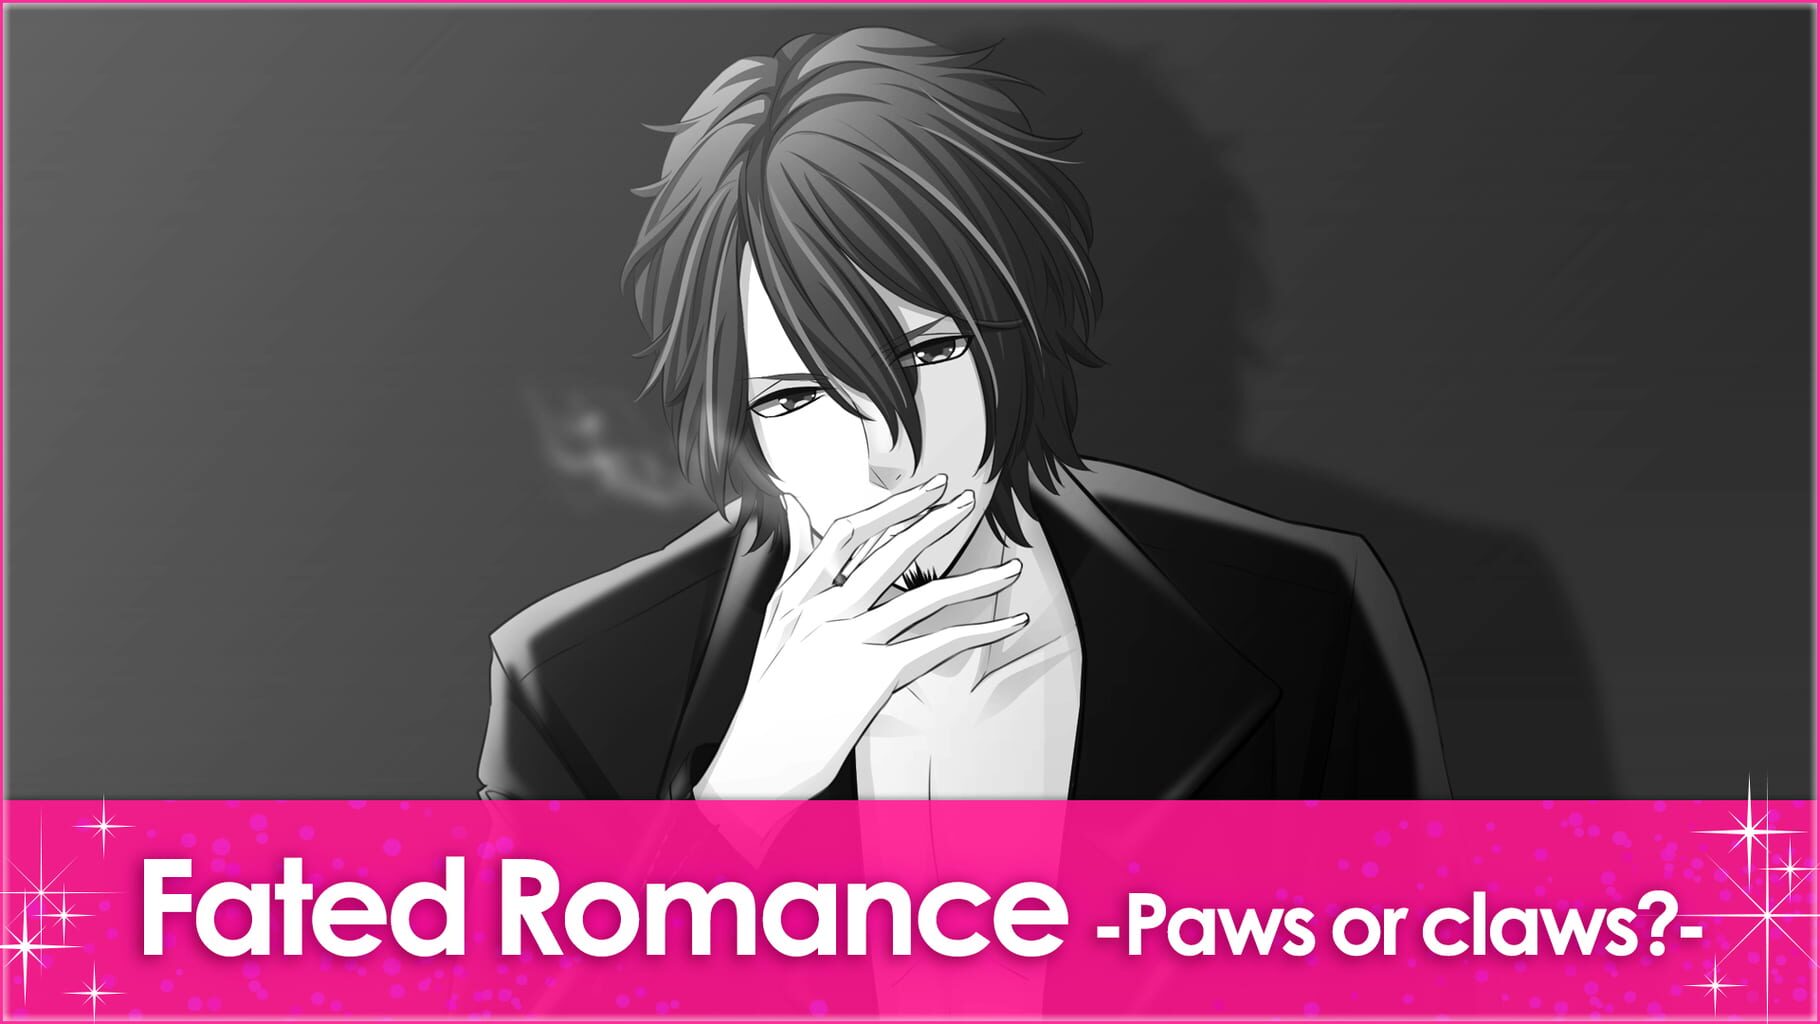 Enchanted in the Moonlight: Fated Romance - Paws or Claws? artwork